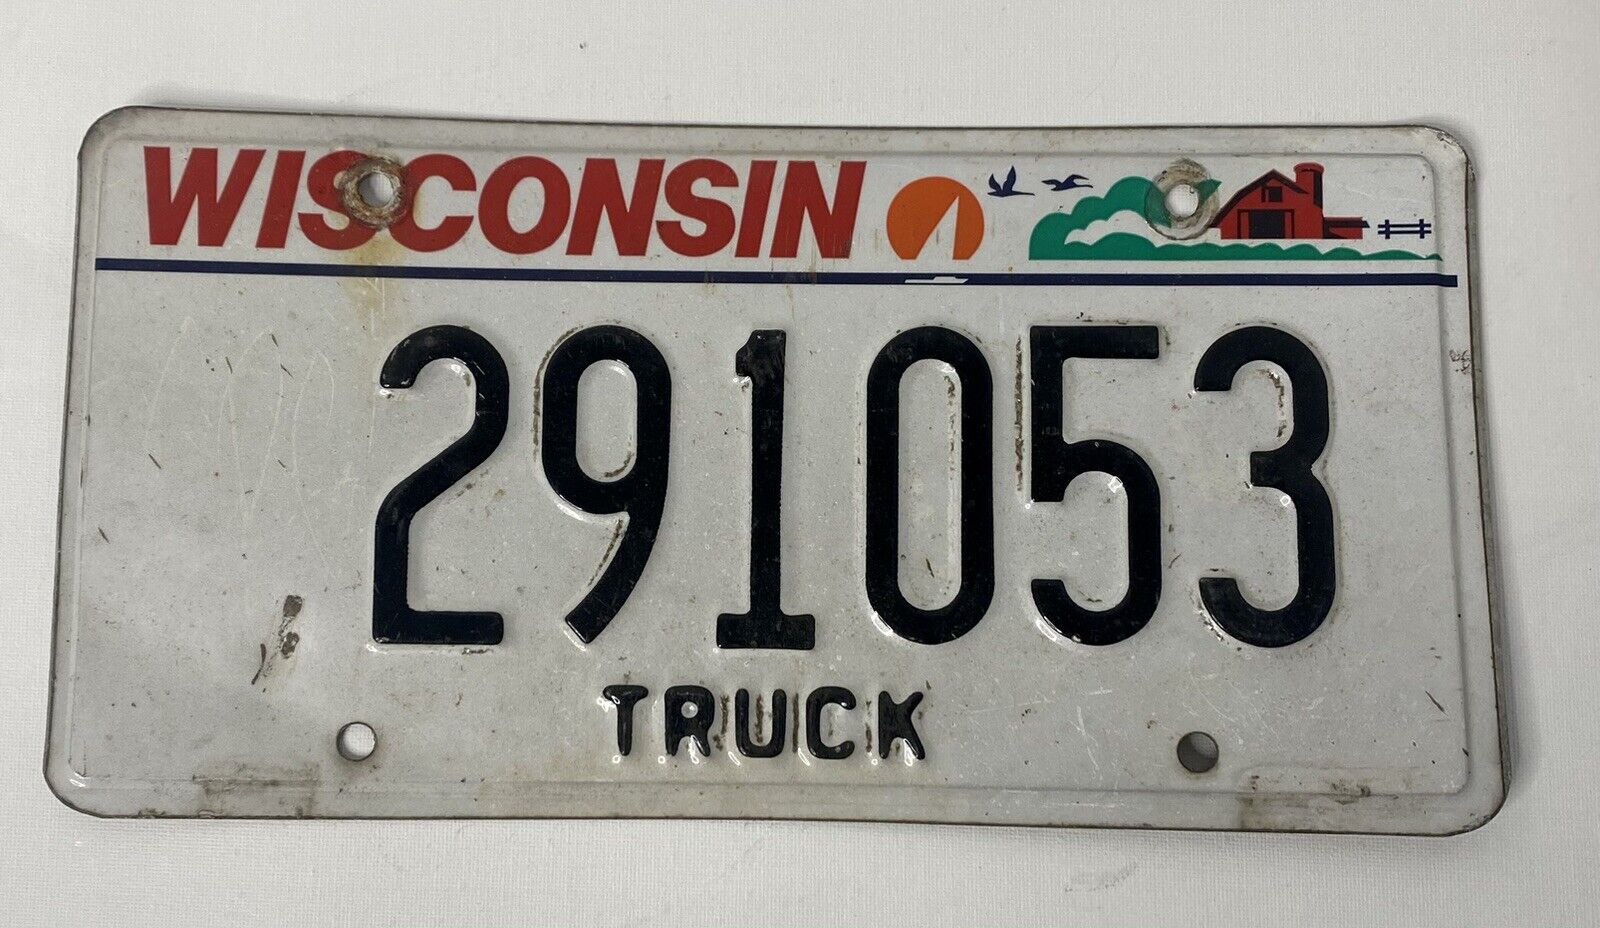 2000 Wisconsin Truck License Plate 291053